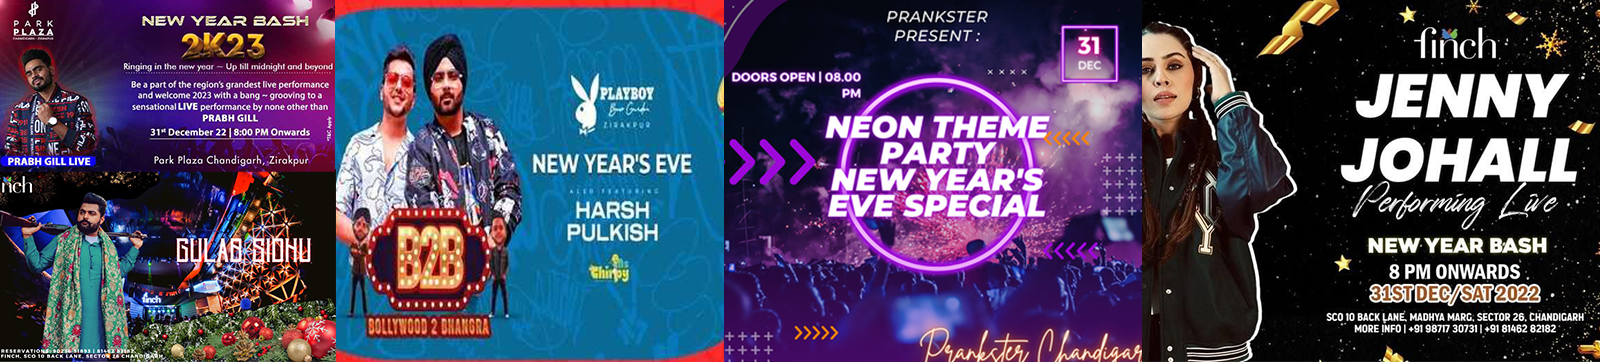 Pick the New Year Party of Your Choice, Here’s the List of Happening Places